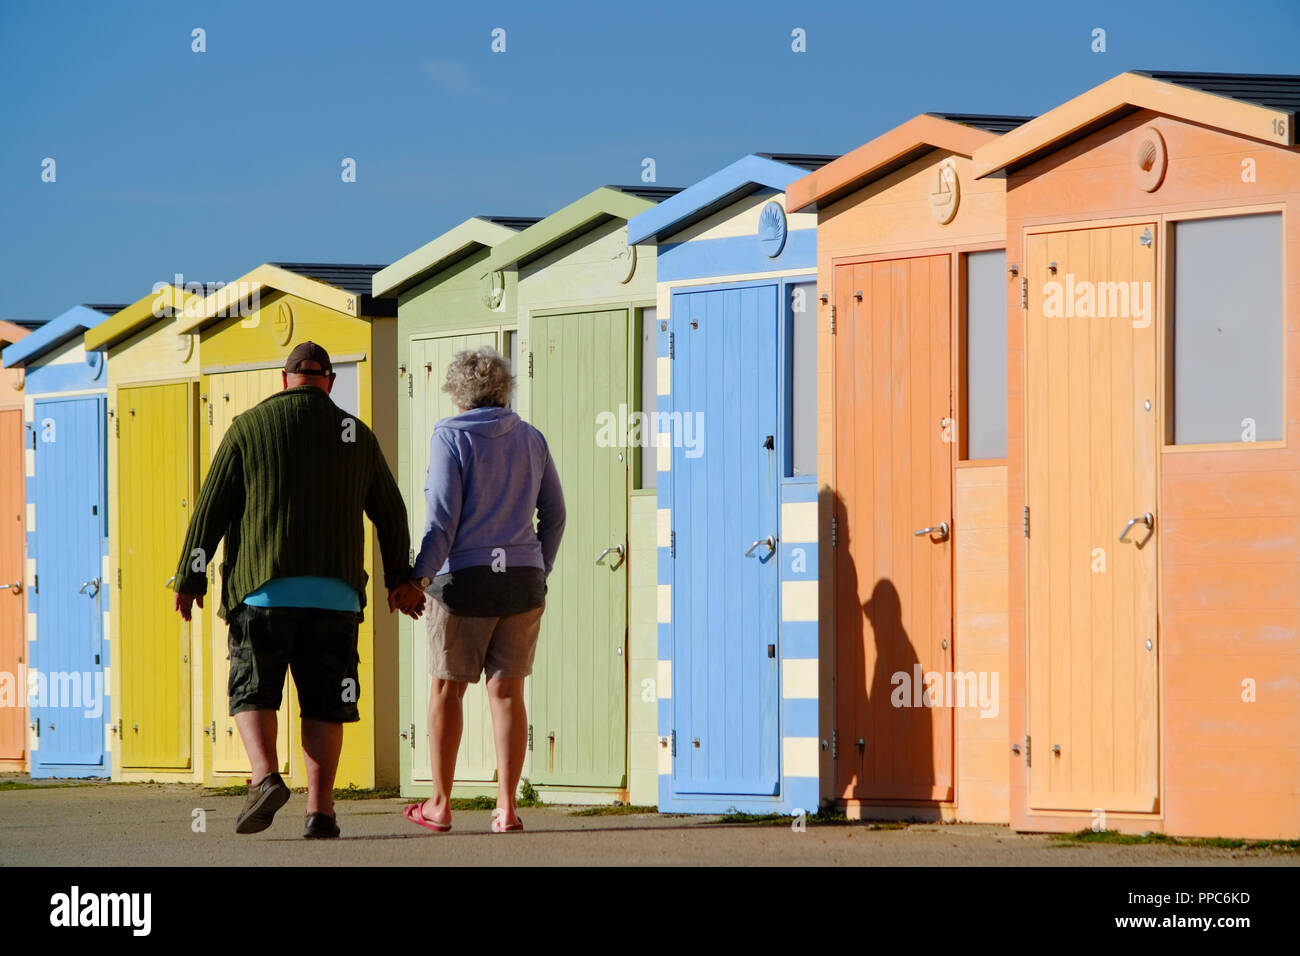 Seaford, East Sussex, UK. 25th September 2018. People enjoy warm and sunny weather on Seaford Beach. © Peter Cripps/Alamy Live News Stock Photo